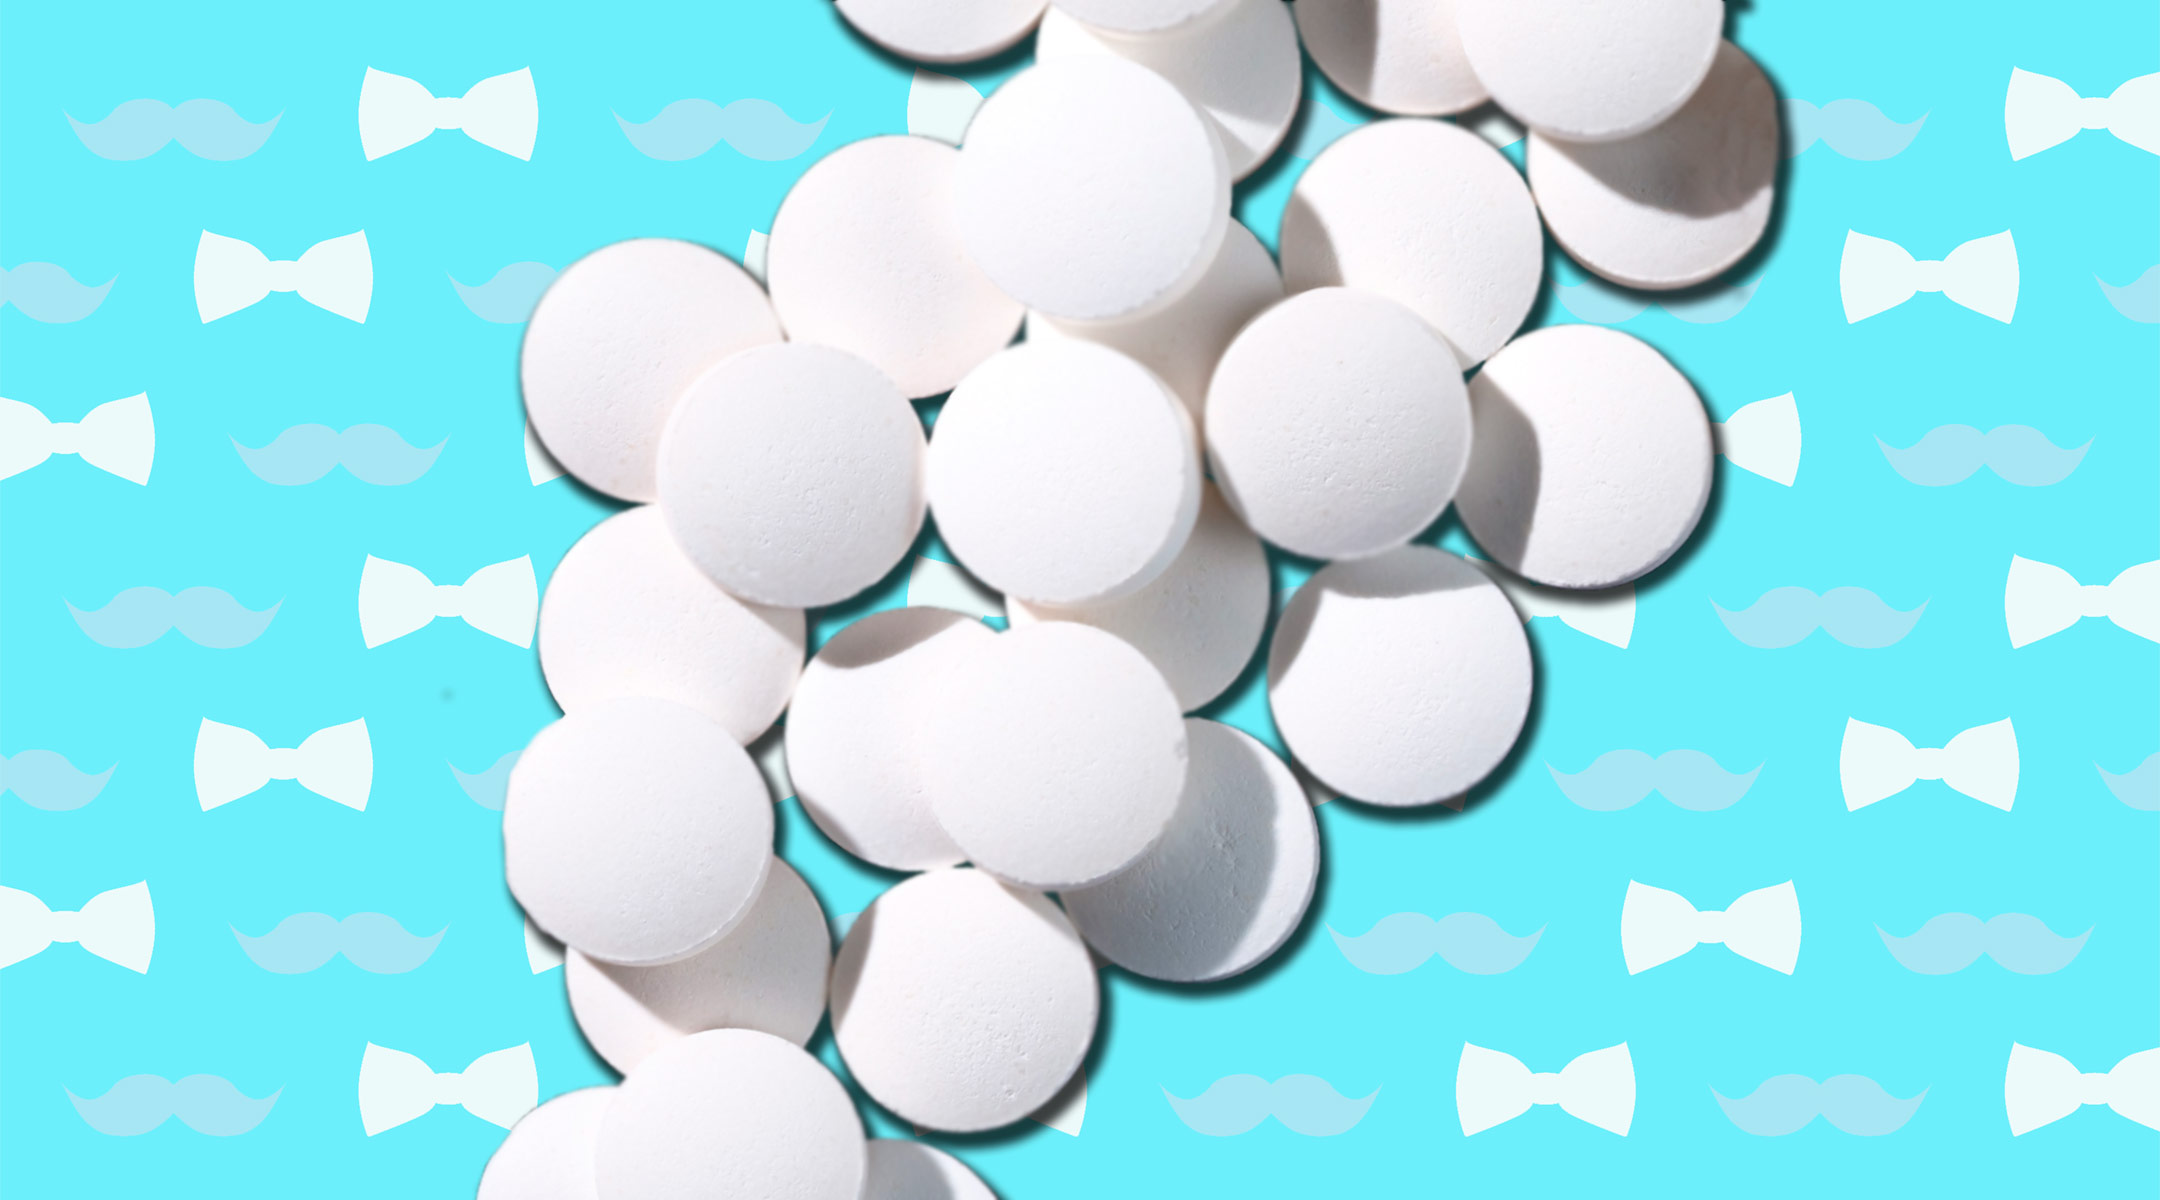 birth control for men, pills overlaid on a blue pattern background